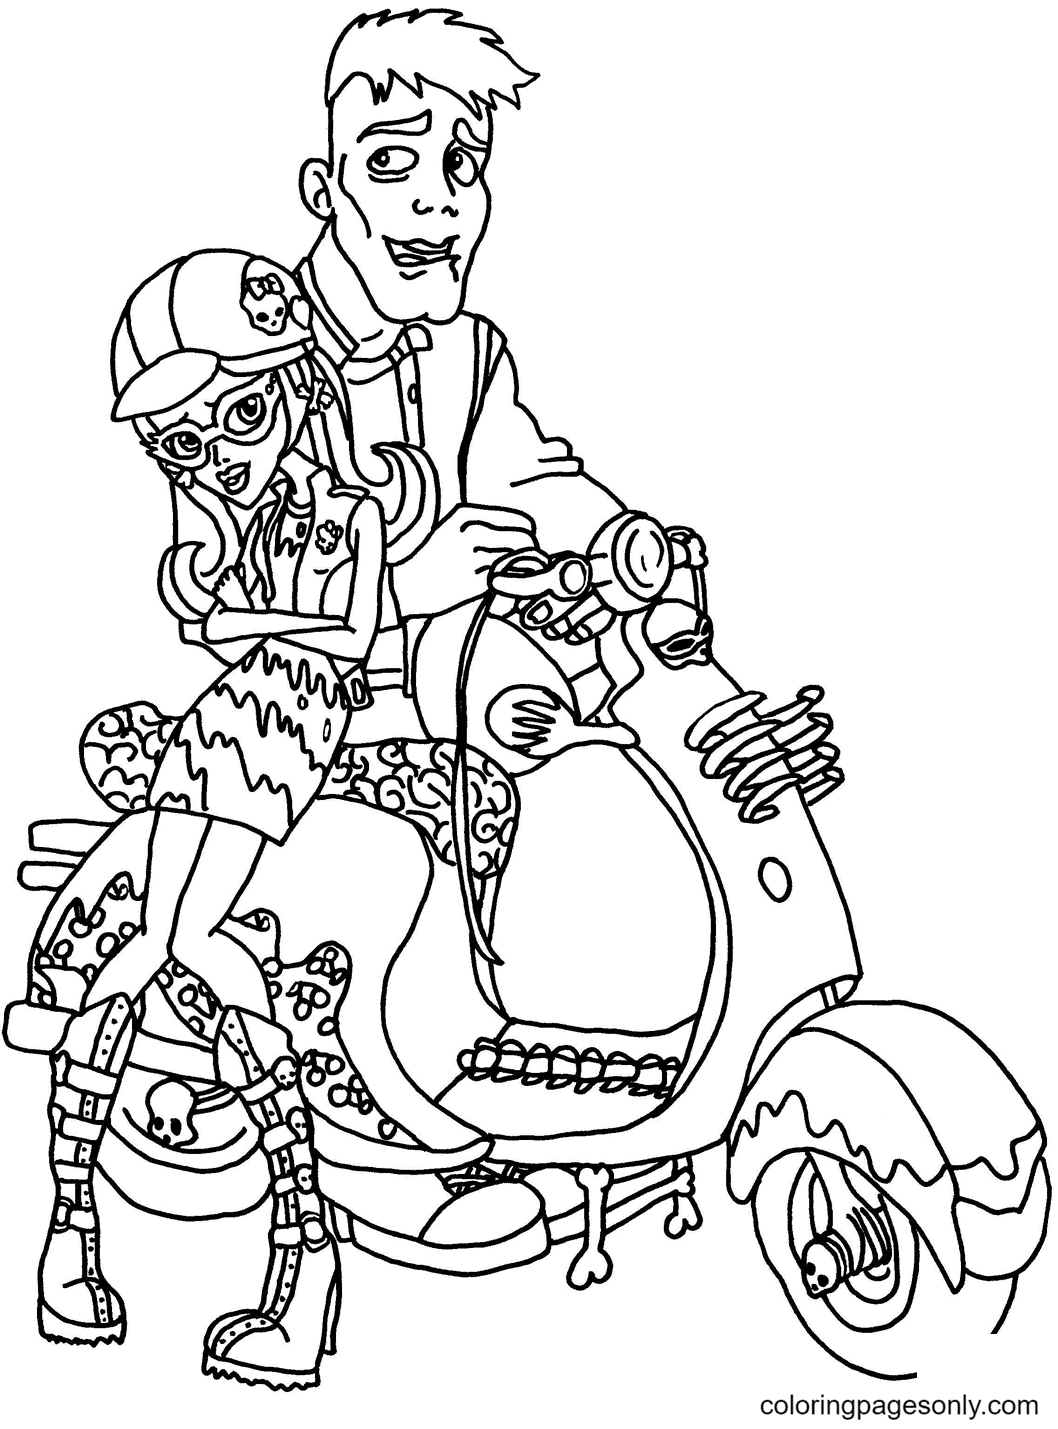 Ghoulia and Slow Moe Coloring Page